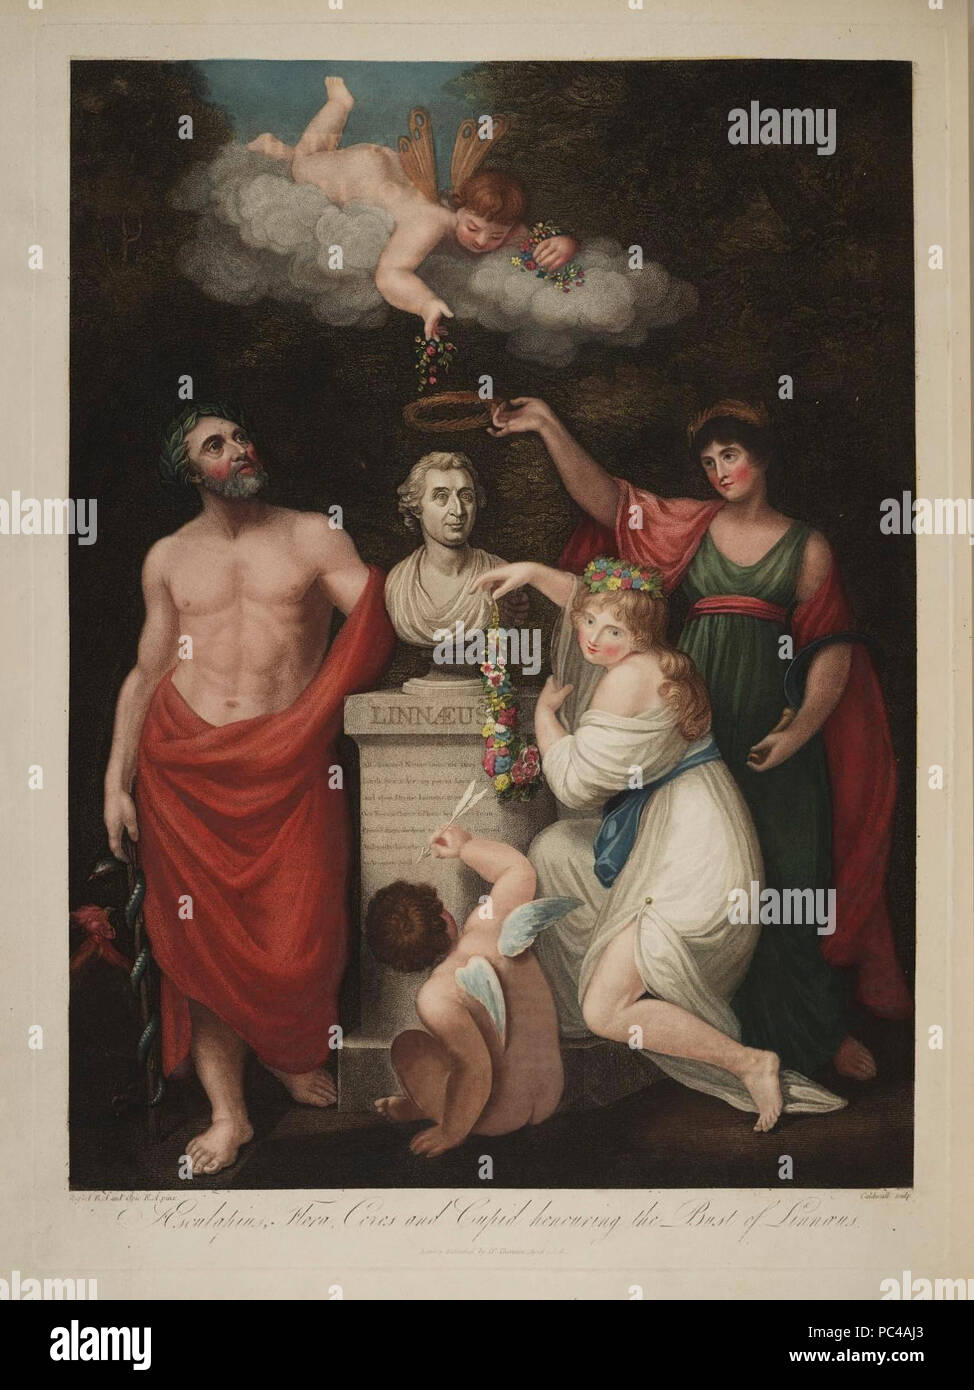 Aesclepius, Flora, Ceres and Cupid honouring the Bust of Linnaeus. Stock Photo